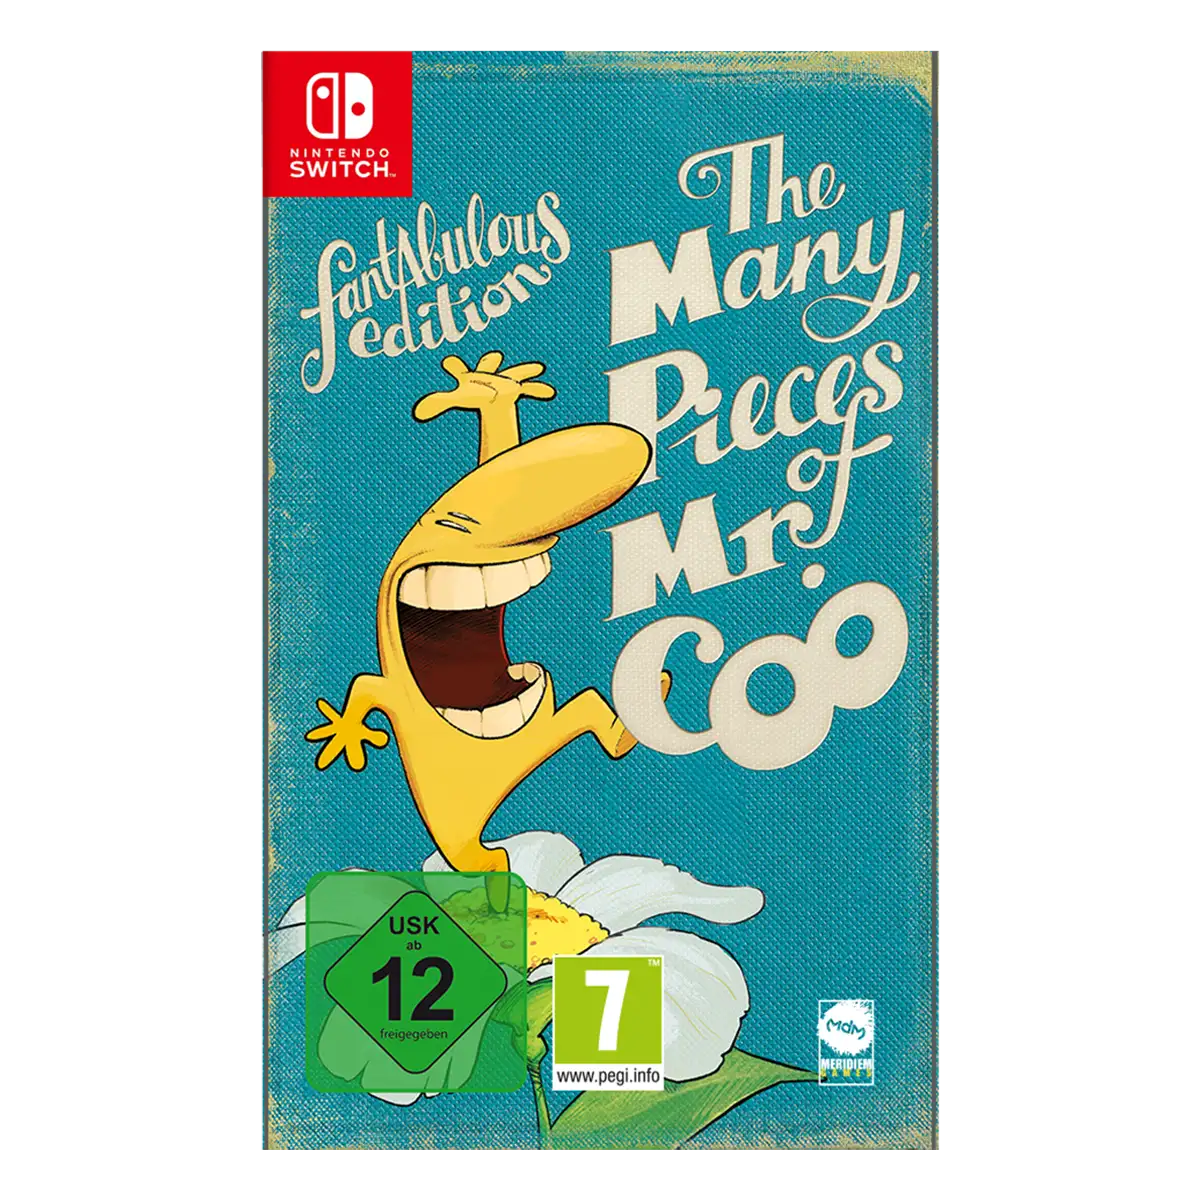 The Many Pieces of Mr. Coo - Fantabulous Edition (Switch)